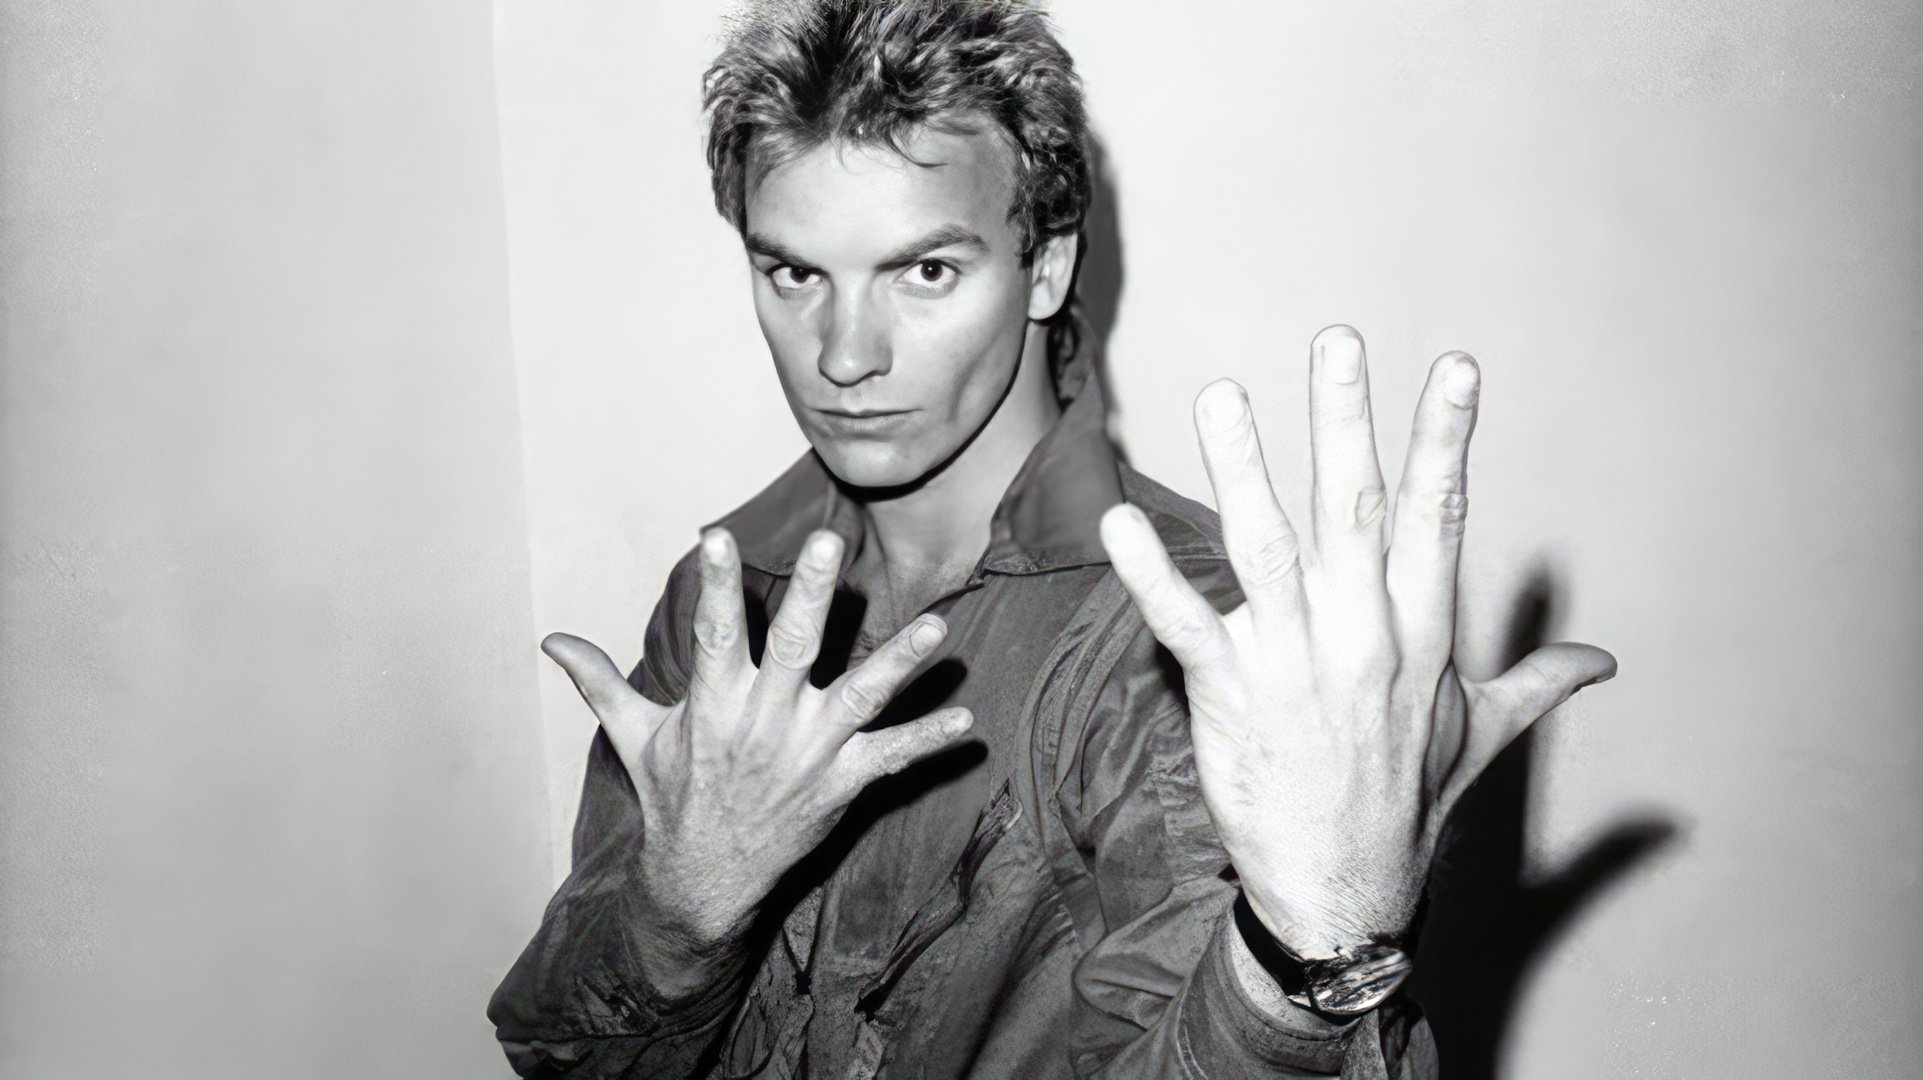 A young Sting at the beginning of his career